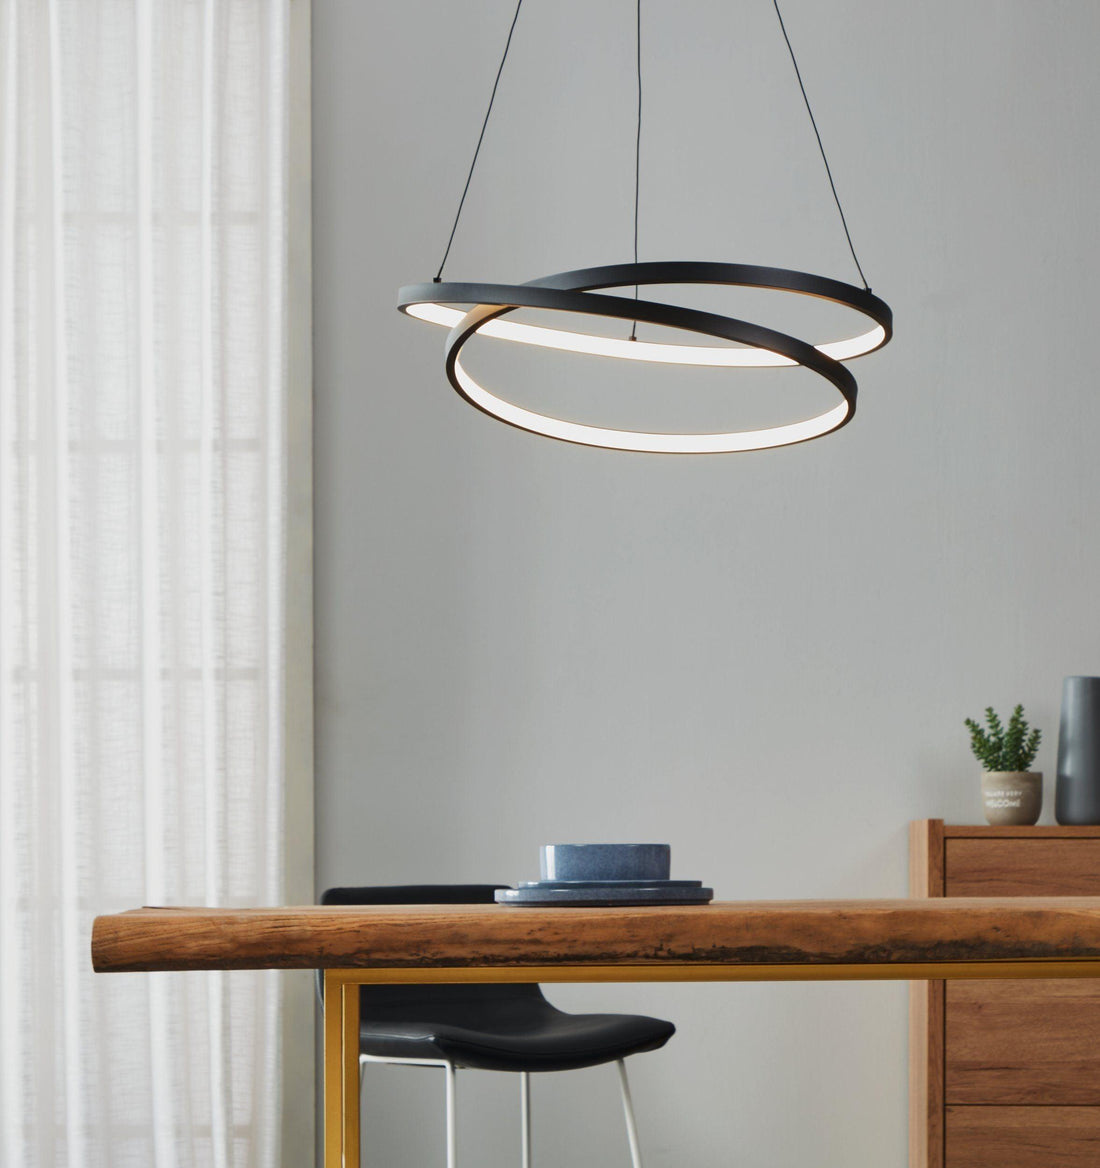 RUOTALE pendant light by The Light Library